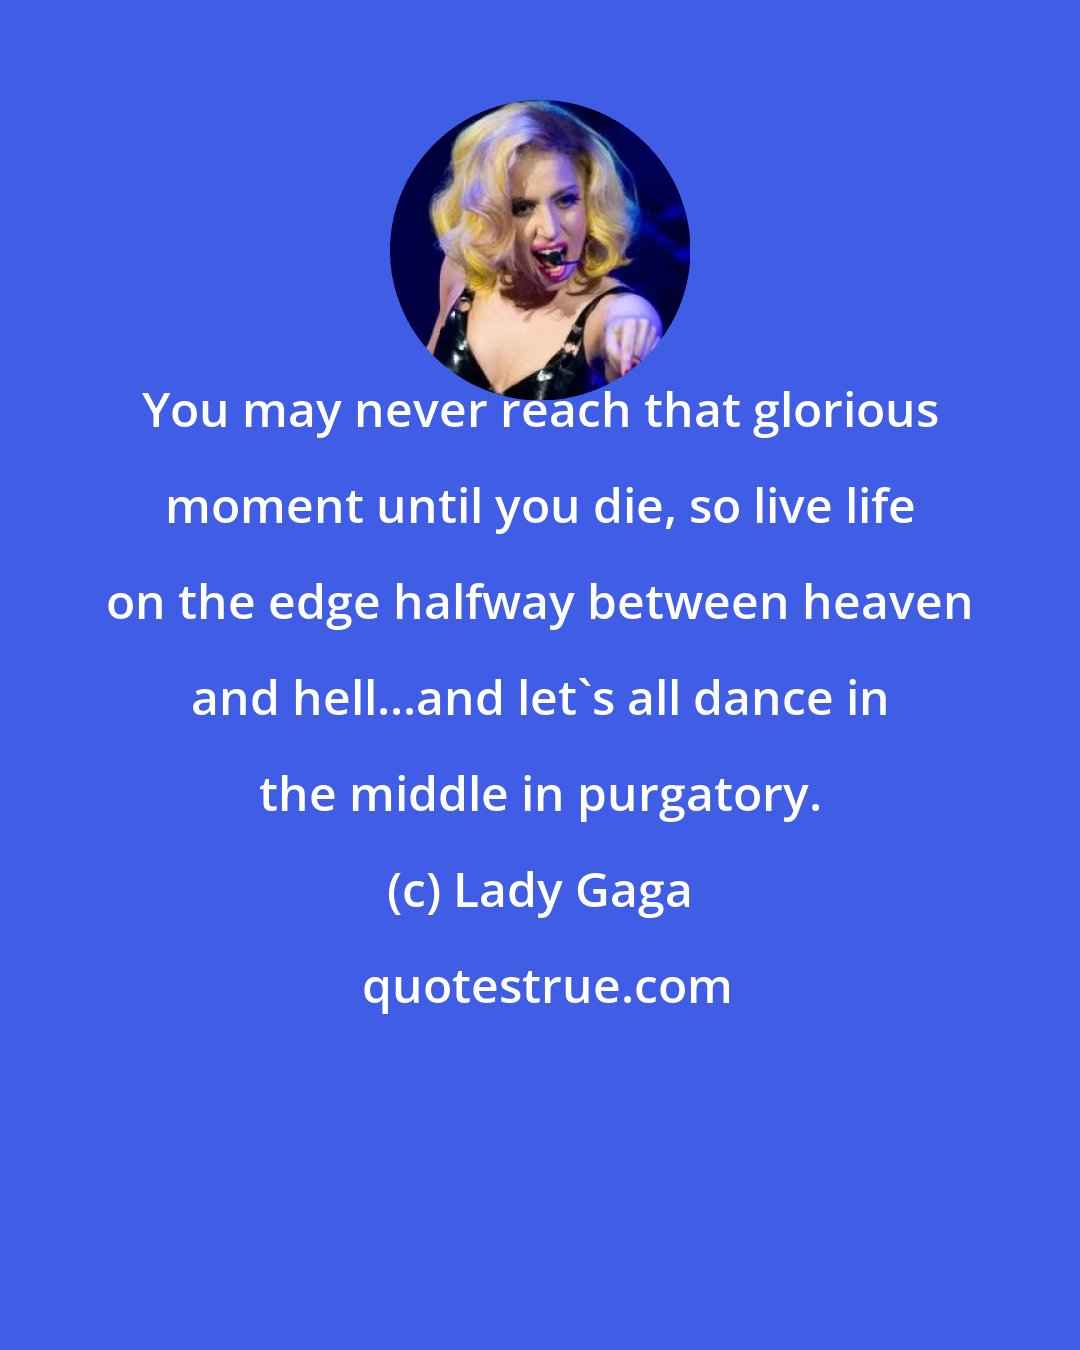 Lady Gaga: You may never reach that glorious moment until you die, so live life on the edge halfway between heaven and hell...and let's all dance in the middle in purgatory.